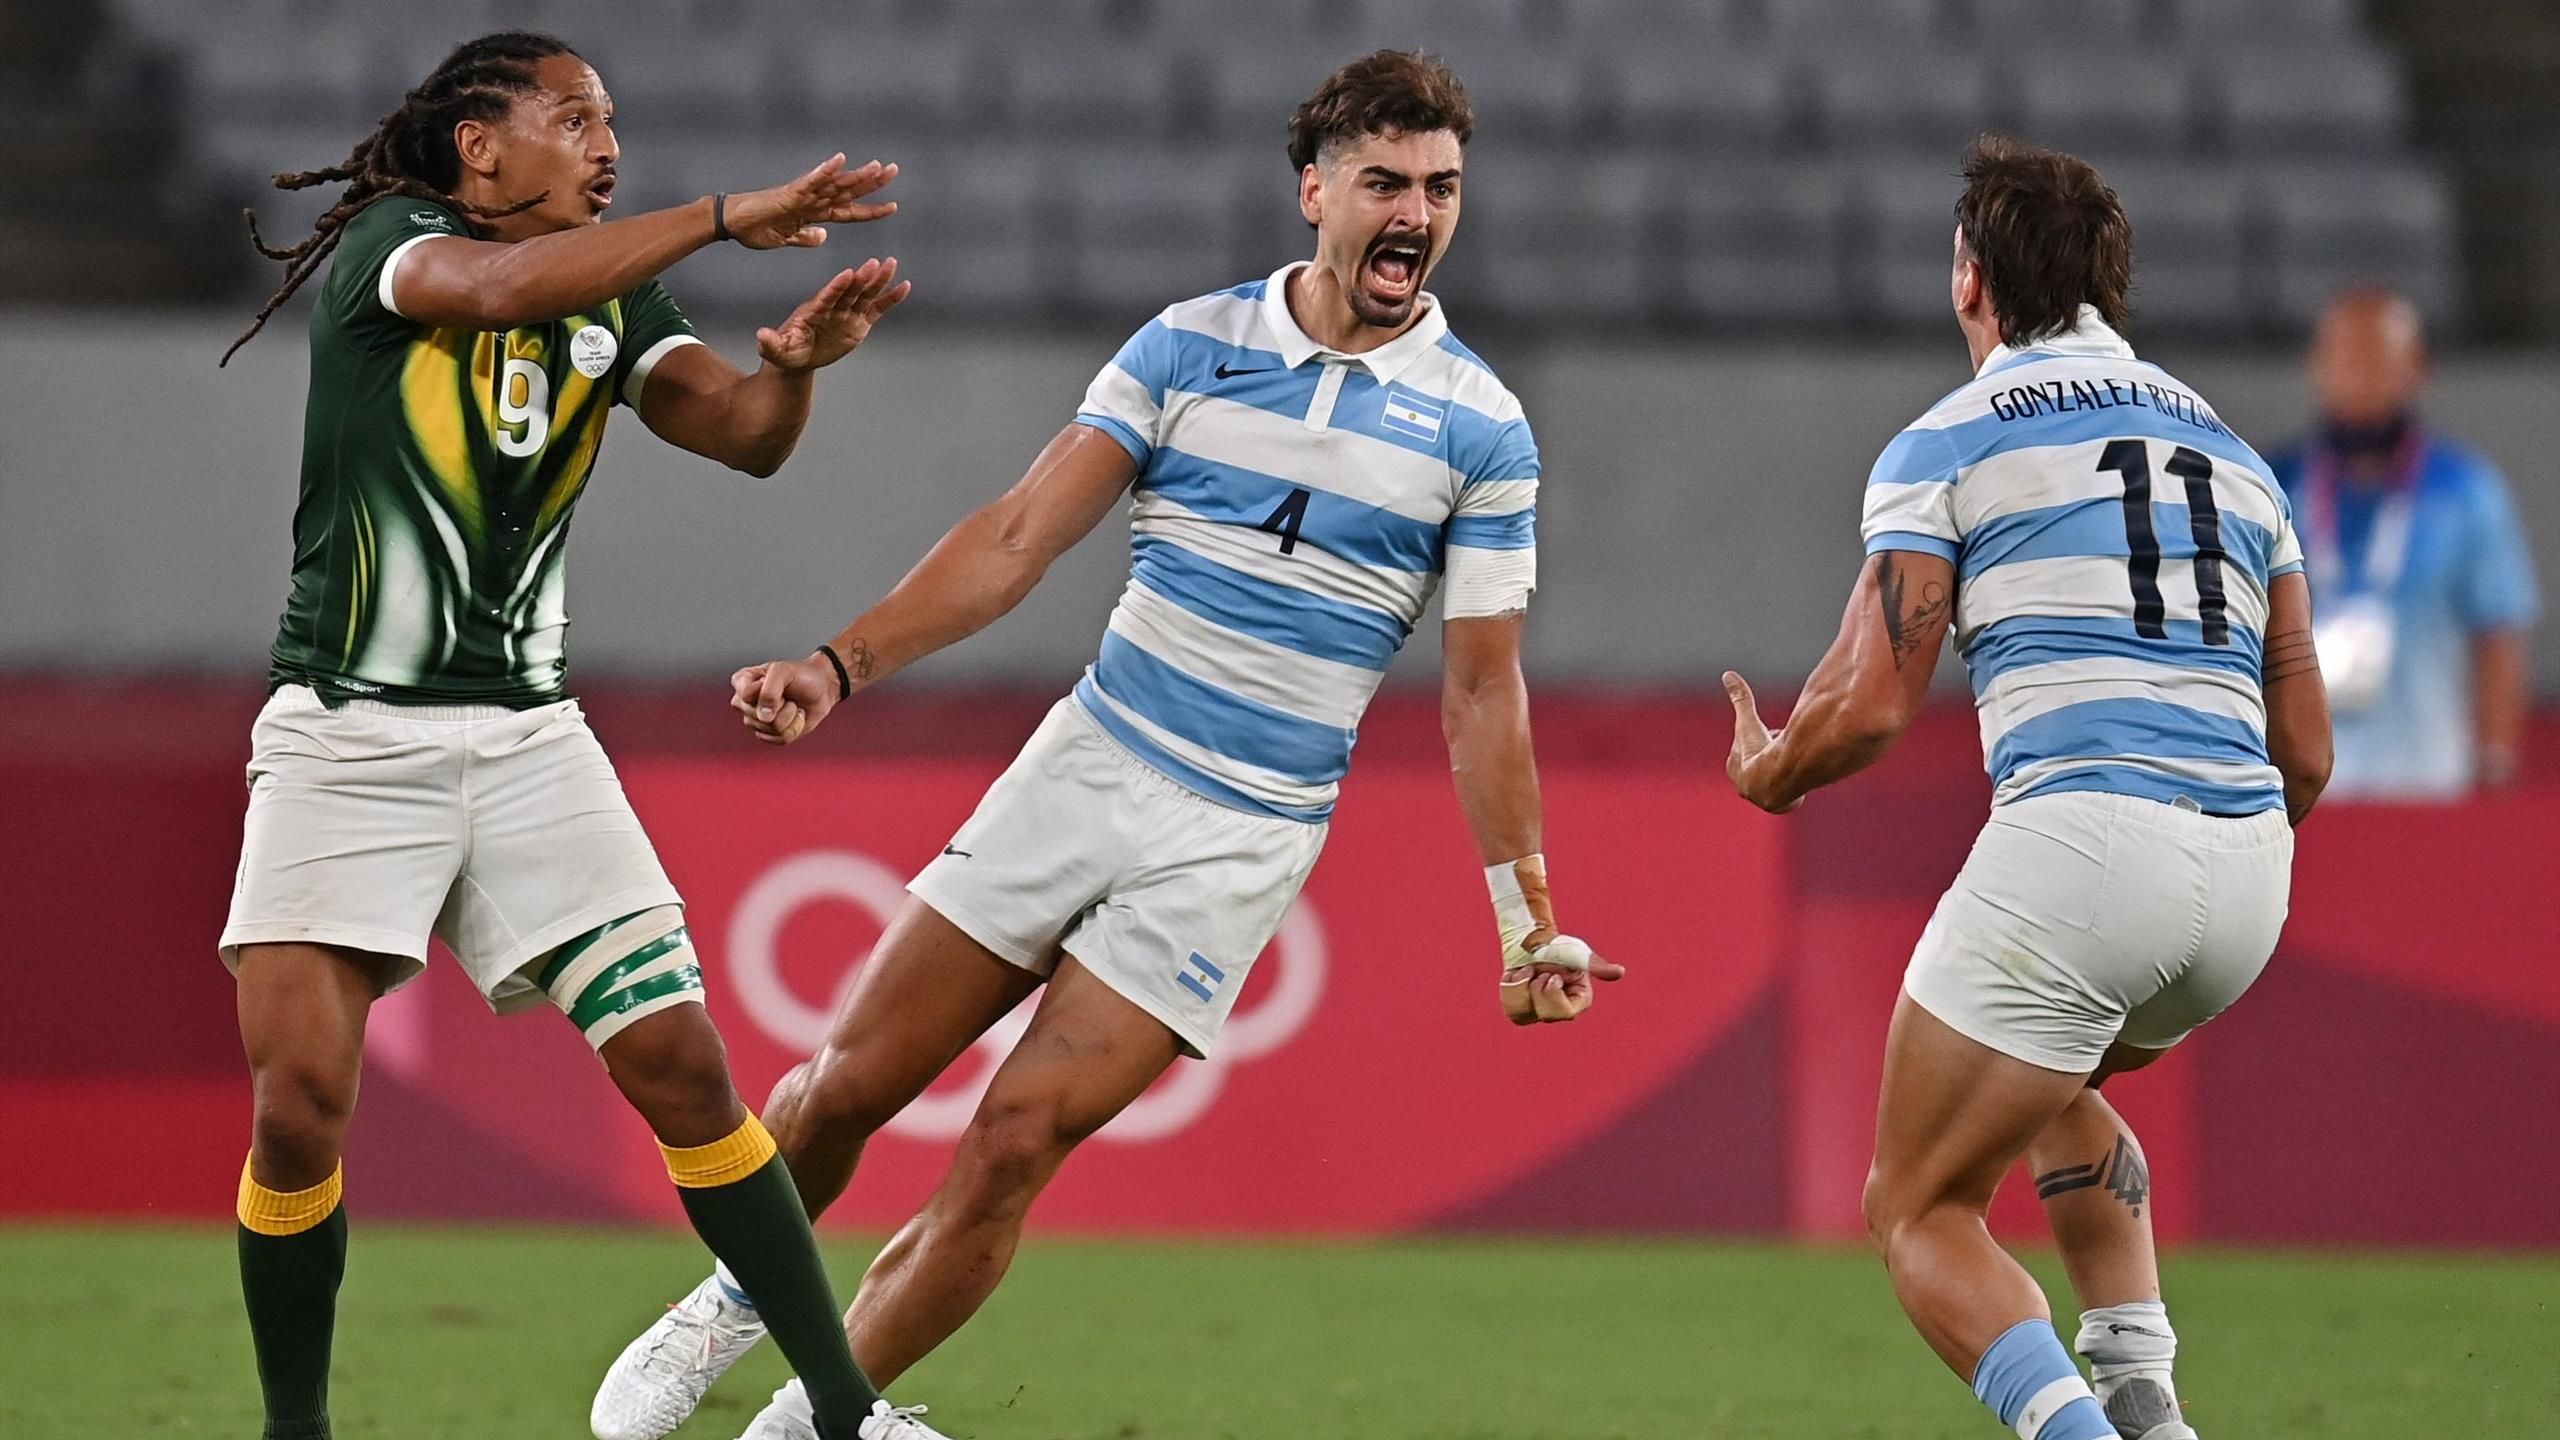 South Africa 7s vs France 7s Prediction, Betting Tips & Odds │03 MARCH, 2023